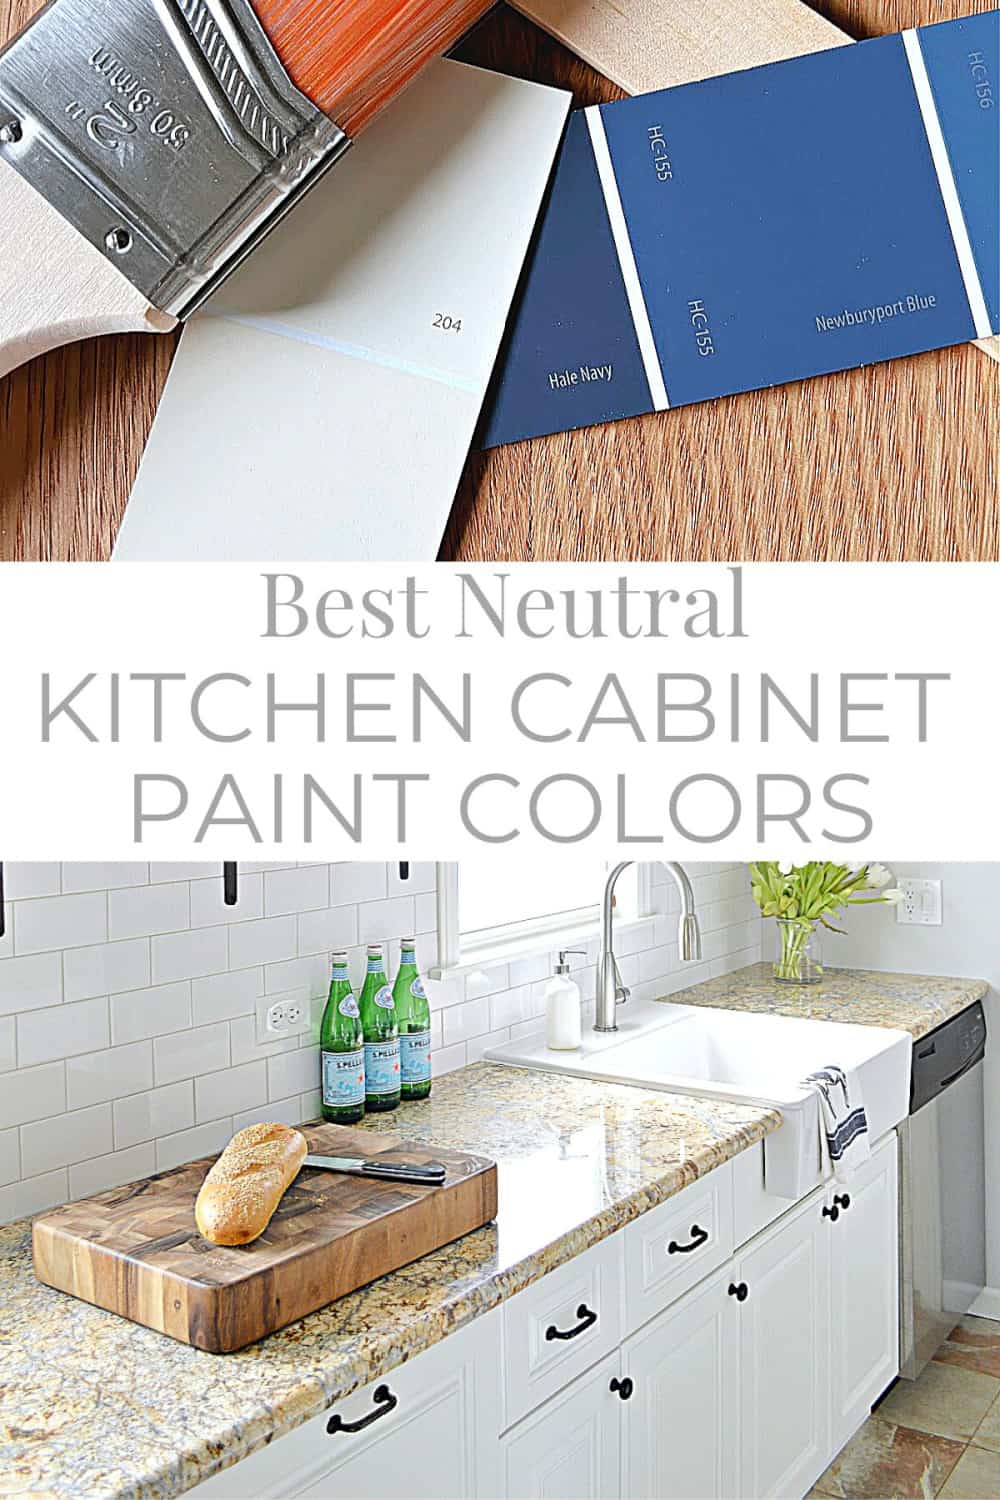 paint color strips and white kitchen cabinets, plus pinterest logo